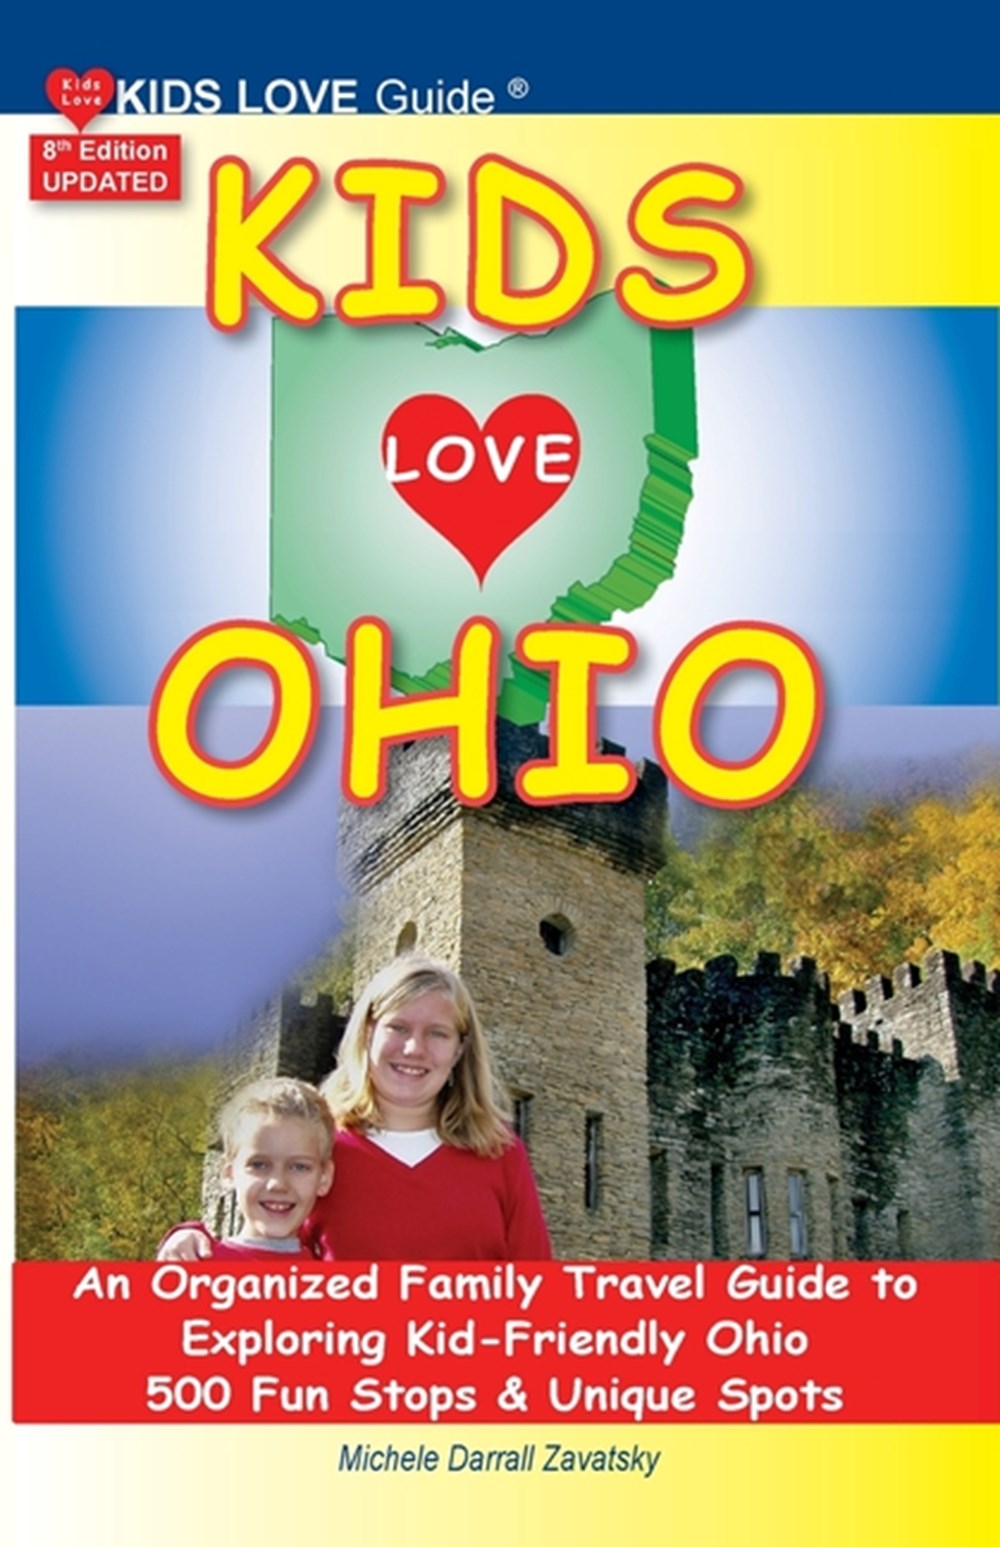 KIDS LOVE OHIO, 8th Edition: An Organized Family Travel Guide to Kid-Friendly Ohio. 500 Fun Stops & 